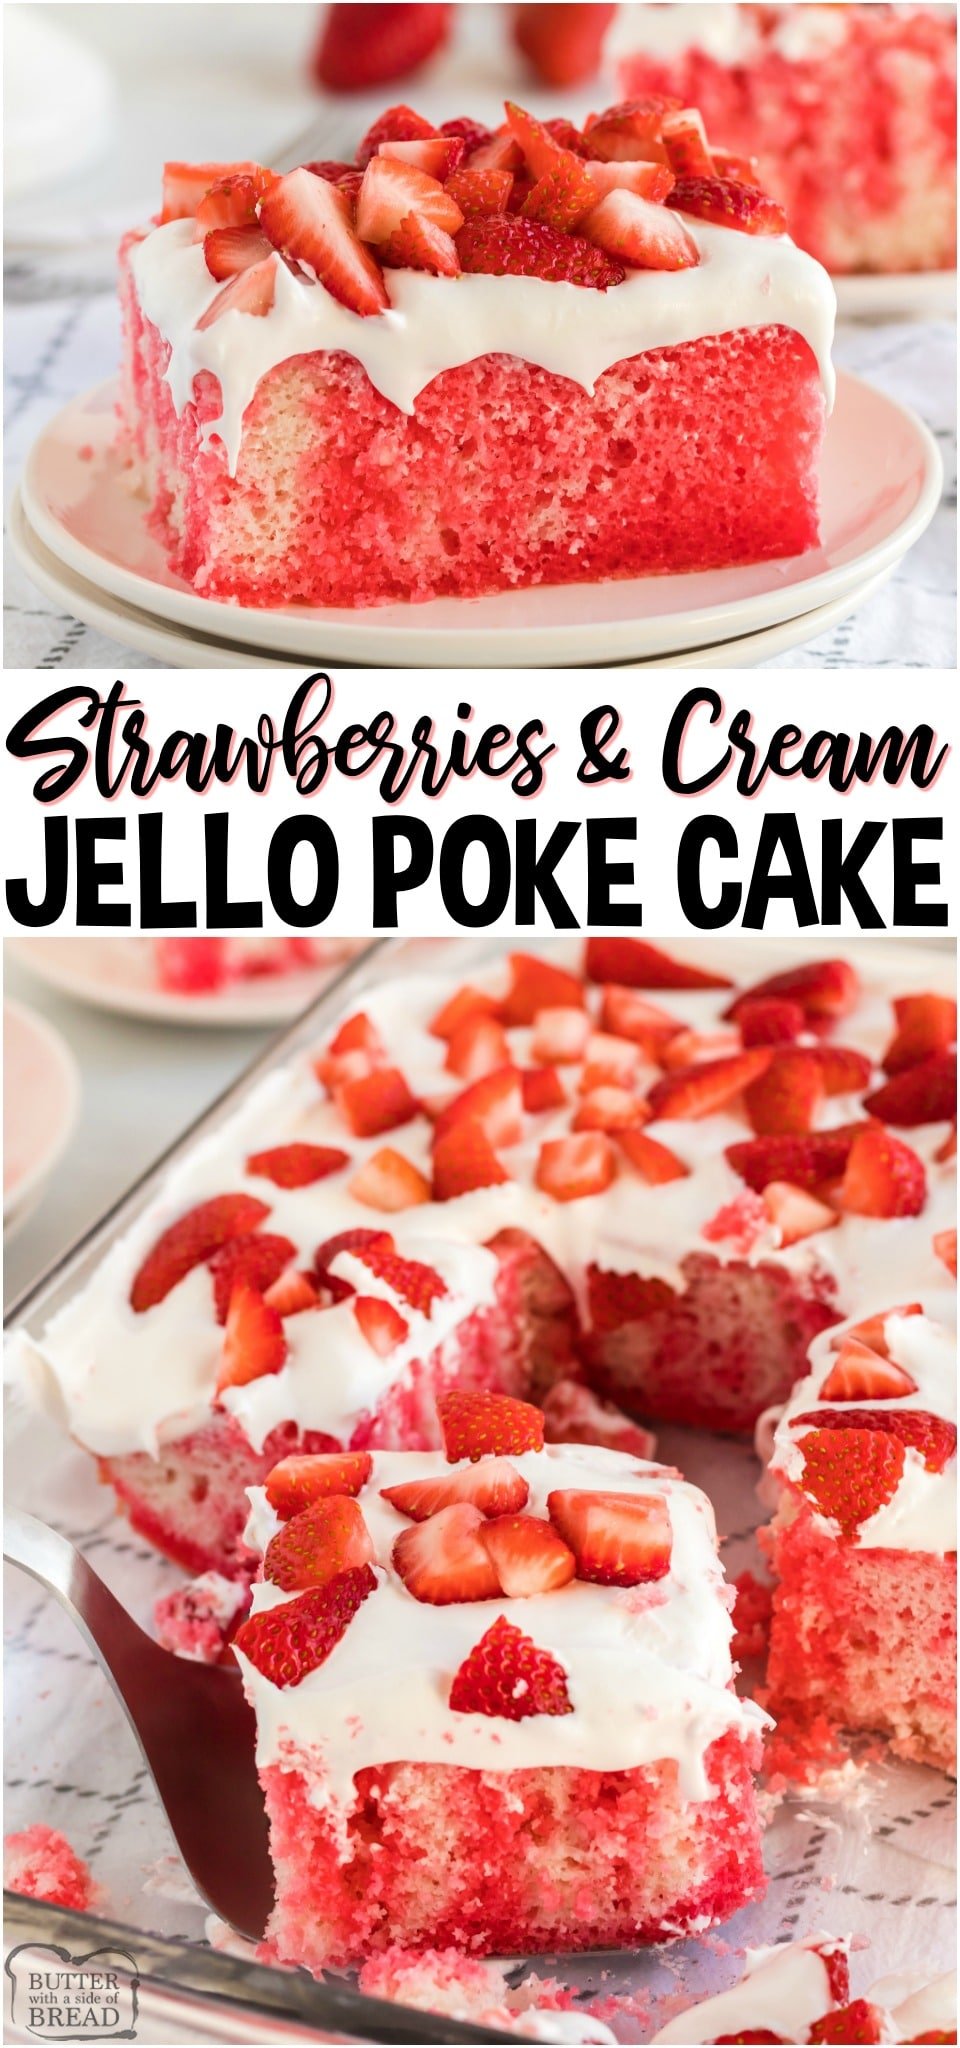 Strawberries and Cream Jello Poke Cake made with a cake mix, seeped with jello & topped with sweet cream and strawberries. Easy jello dessert perfect for get-togethers!